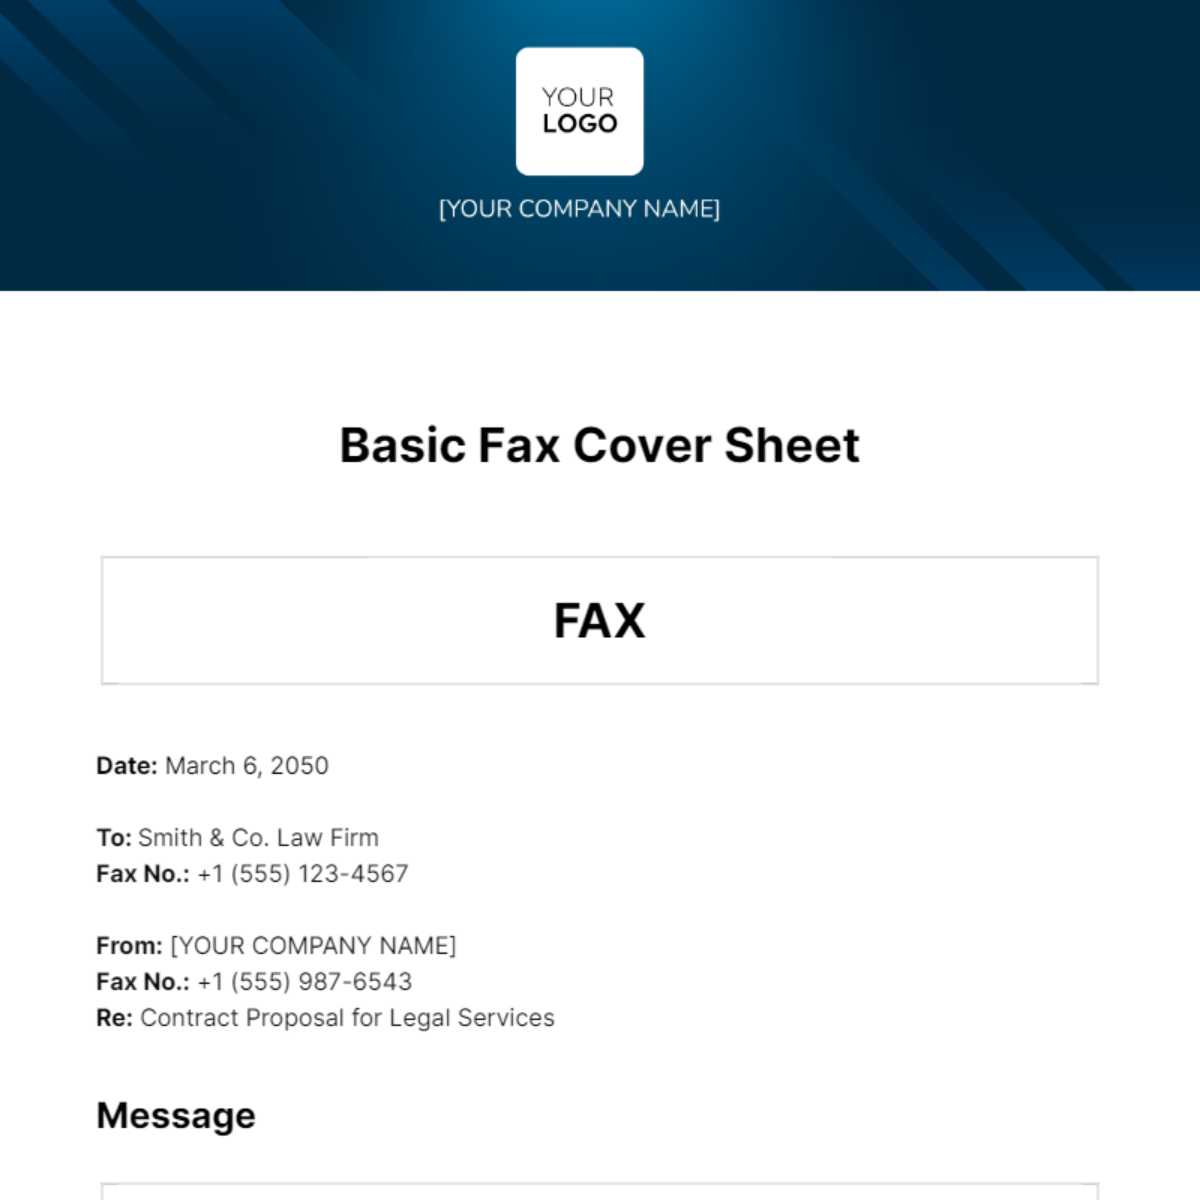 Basic Fax Cover Sheet